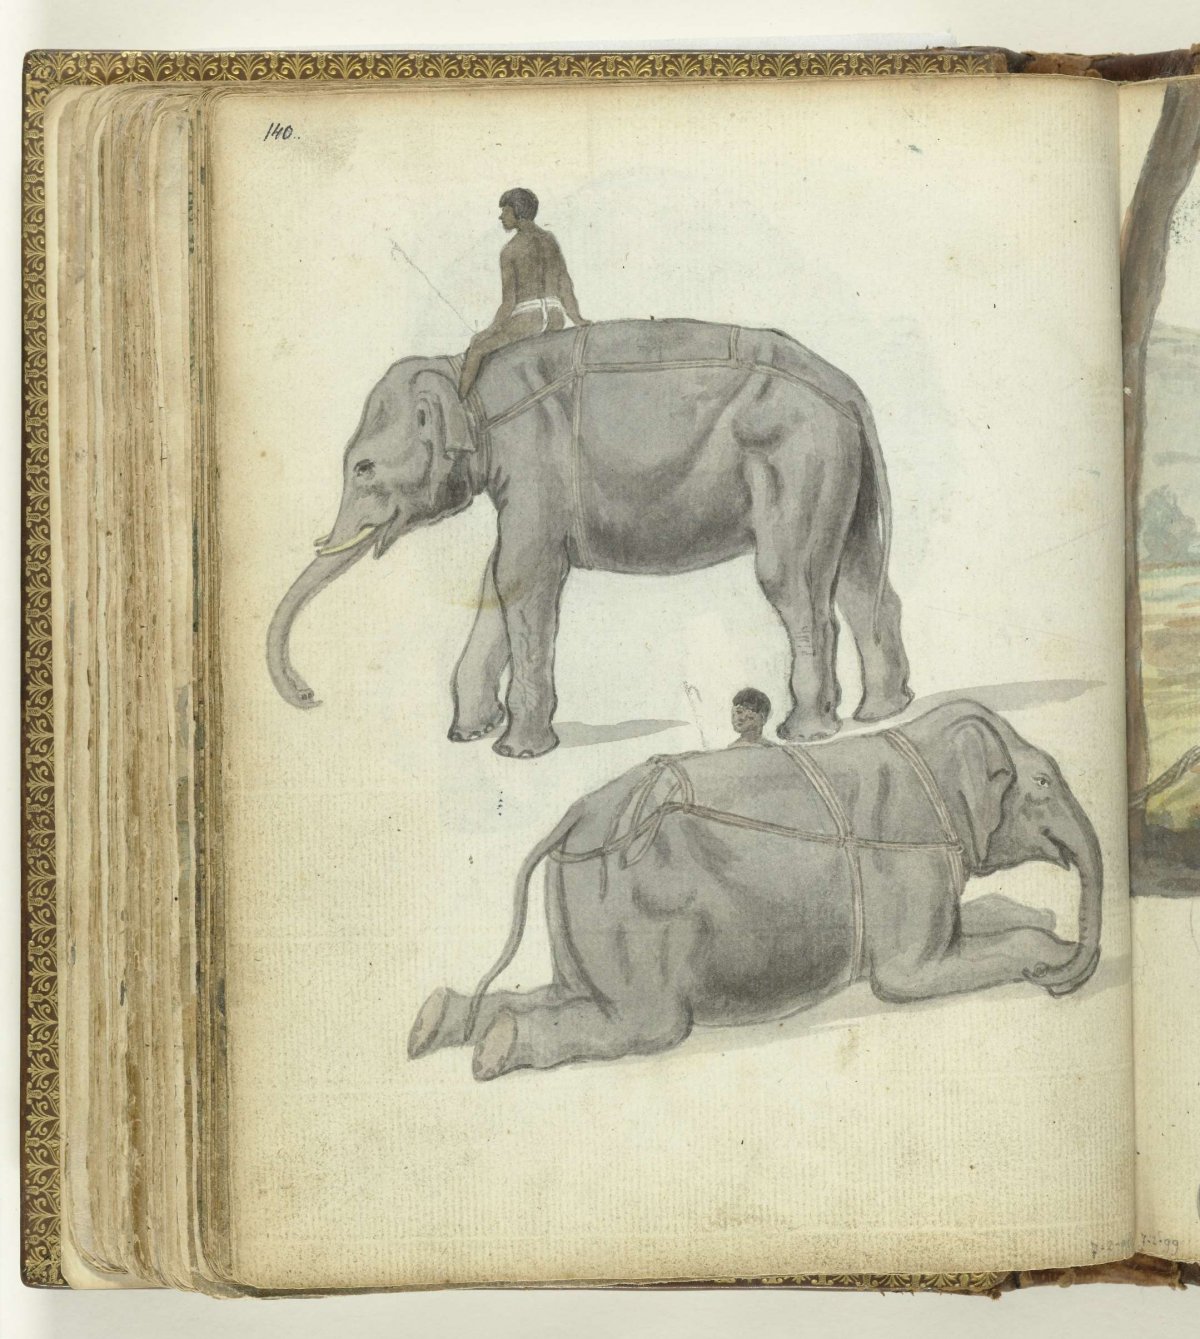 Elephant in harness standing and lying down., Jan Brandes, 1785